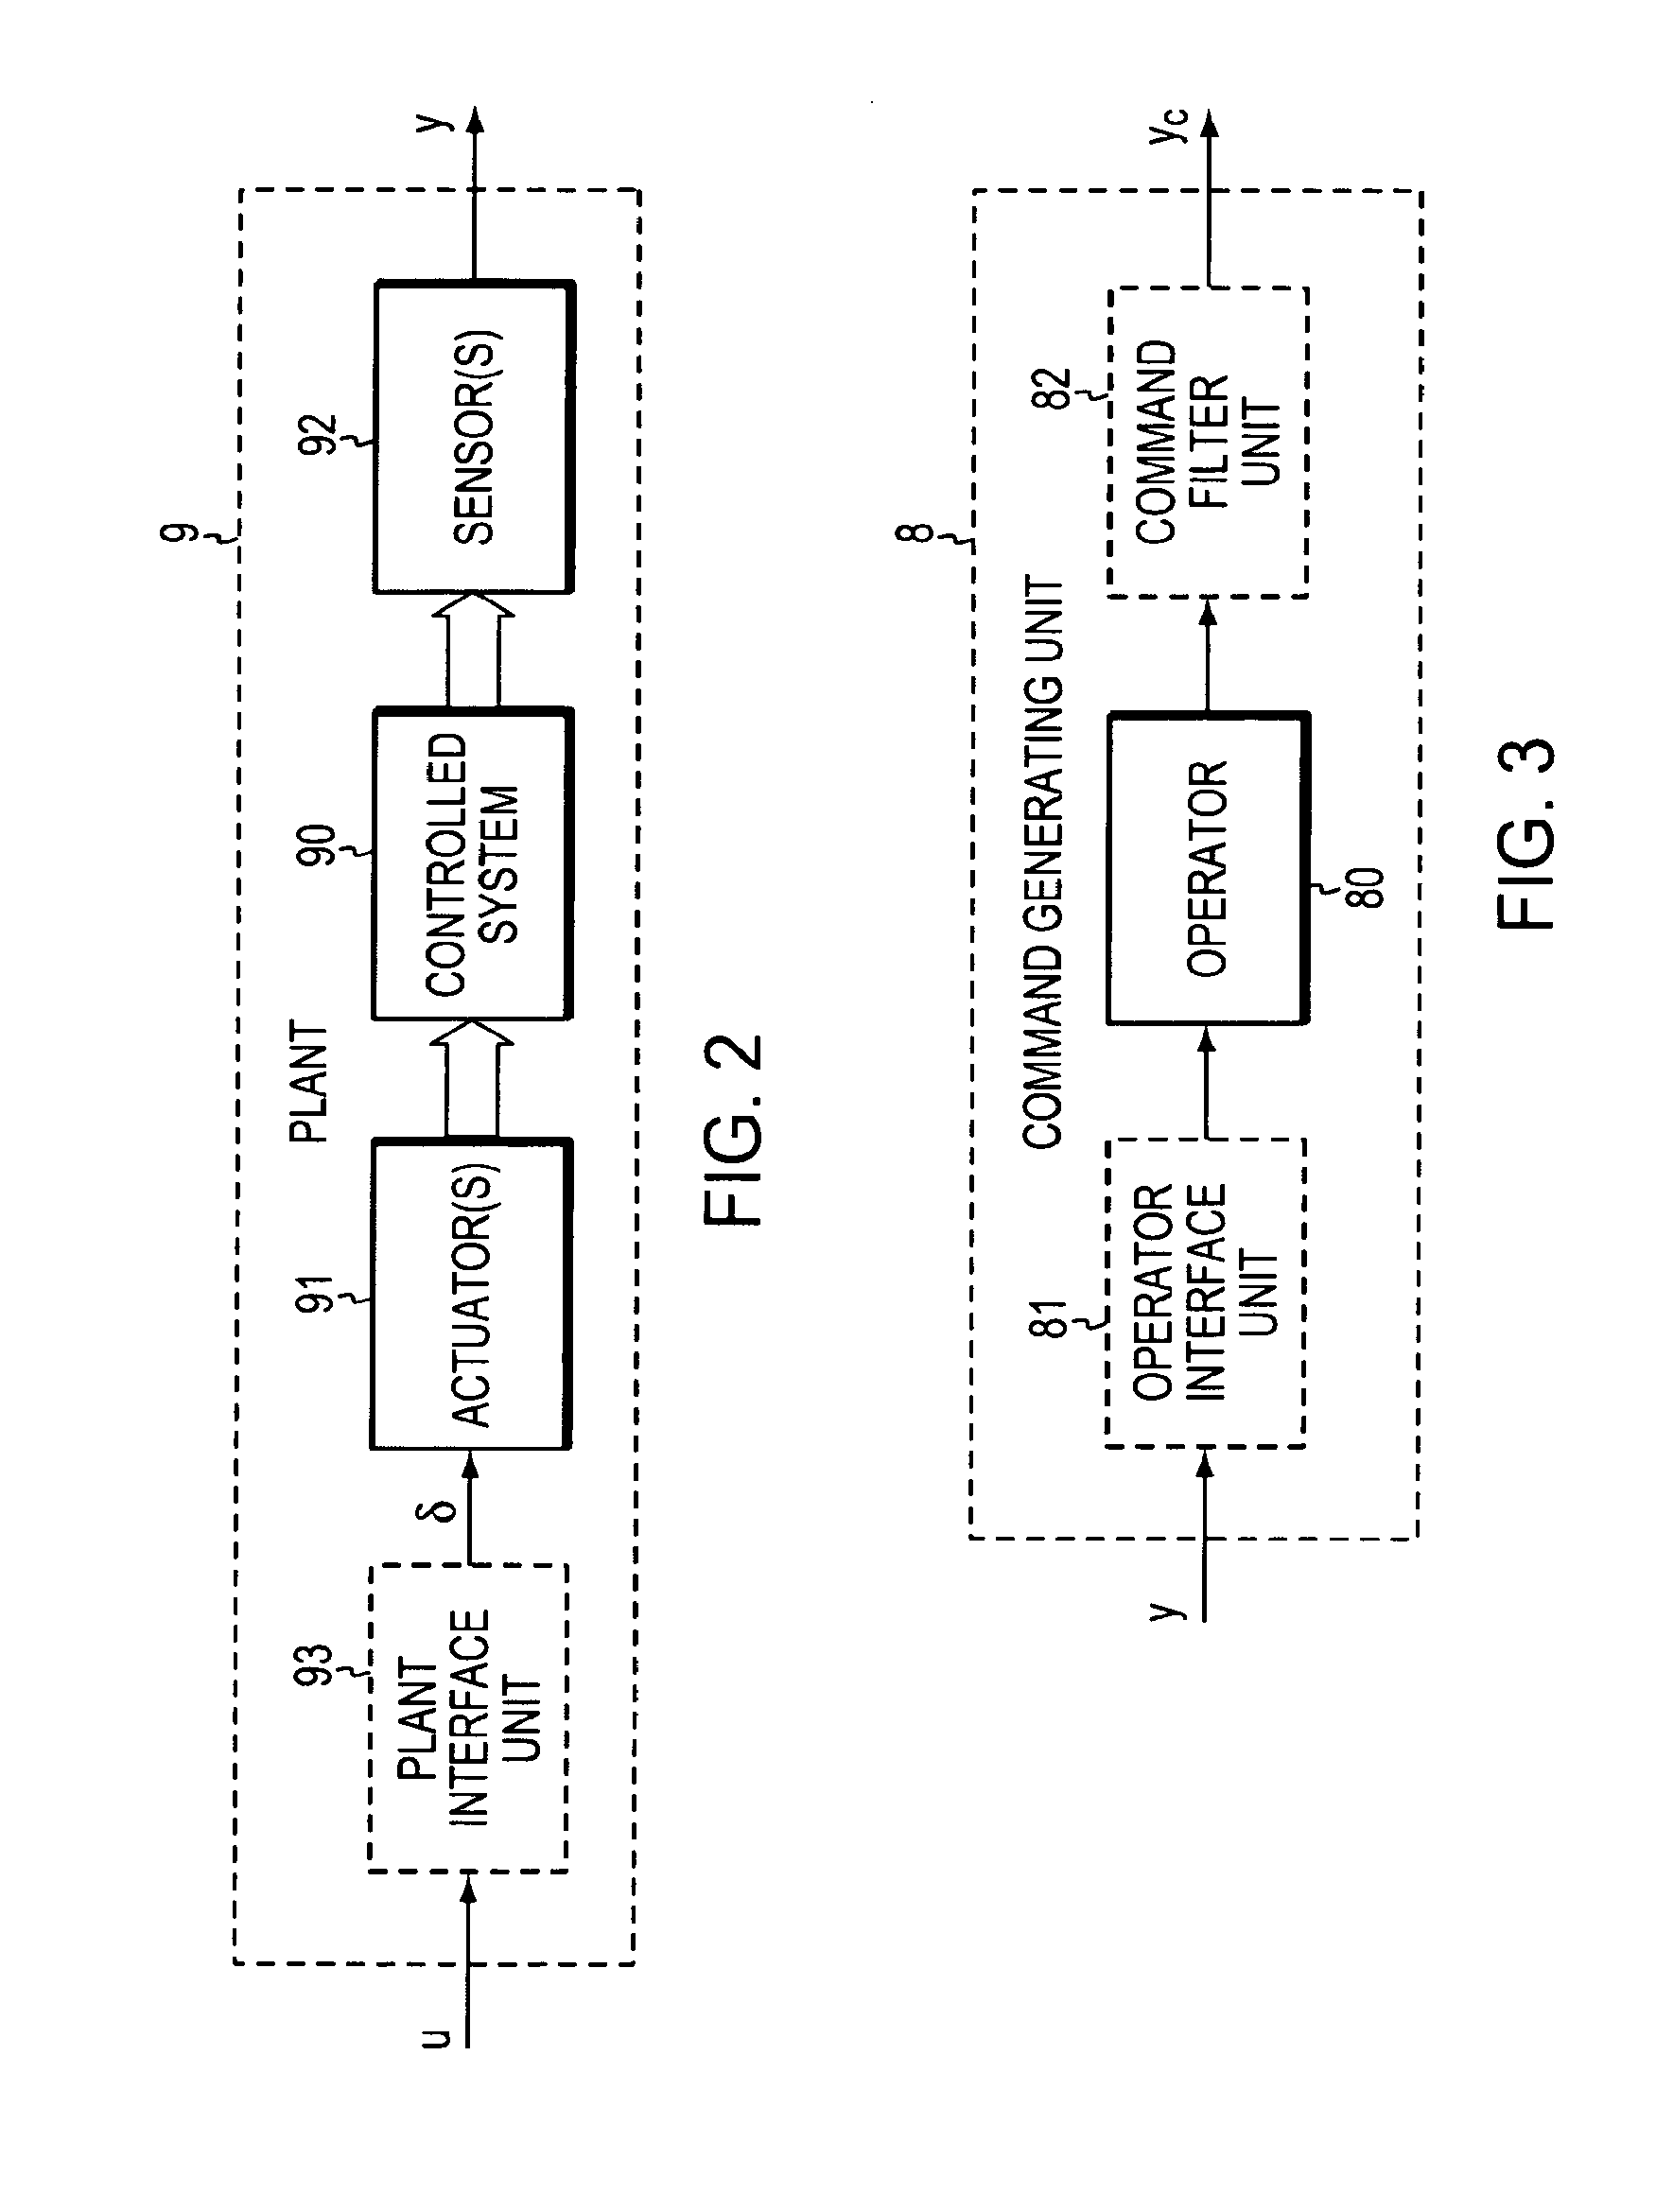 Adaptive output feedback apparatuses and methods capable of controlling a non-minimum phase system